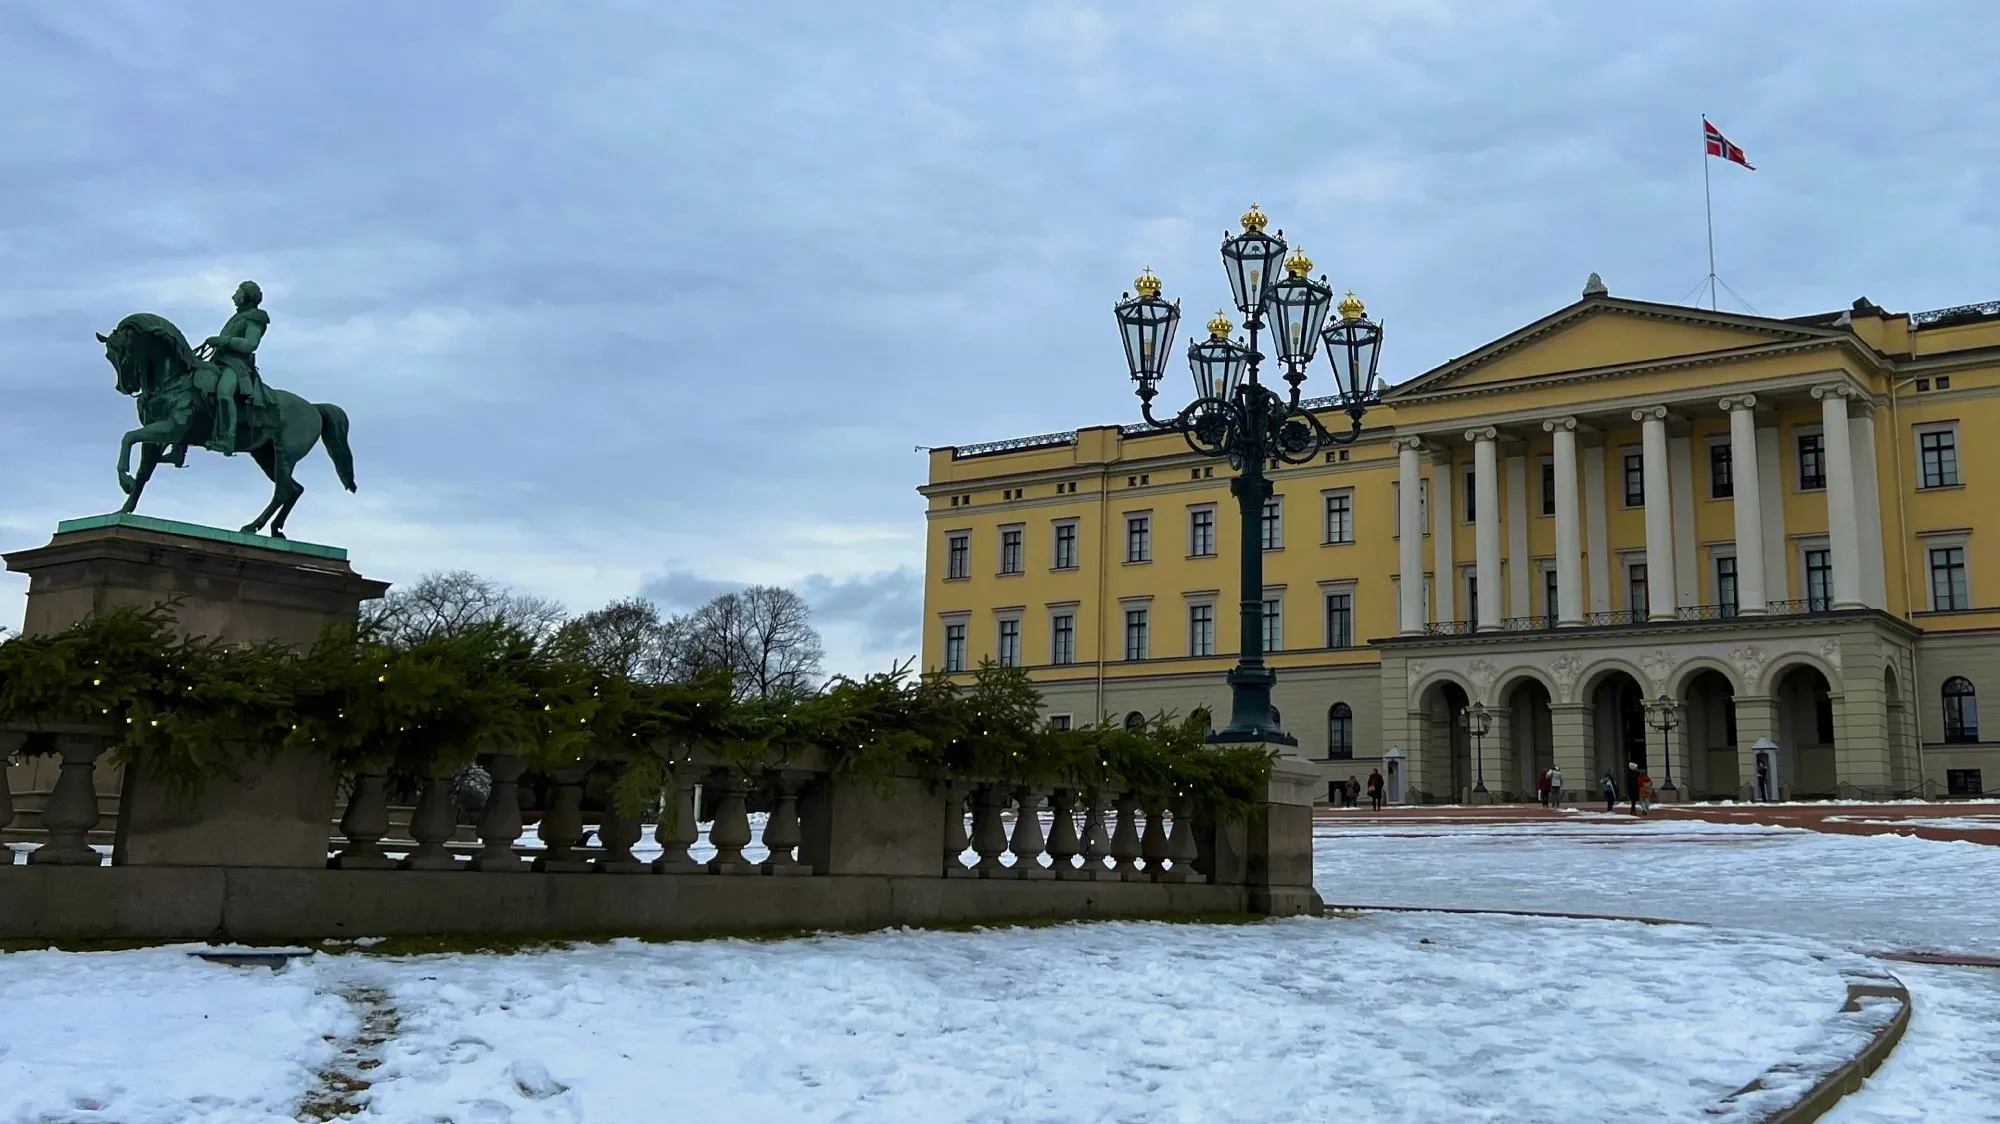 Yellow palace with snow on the ground